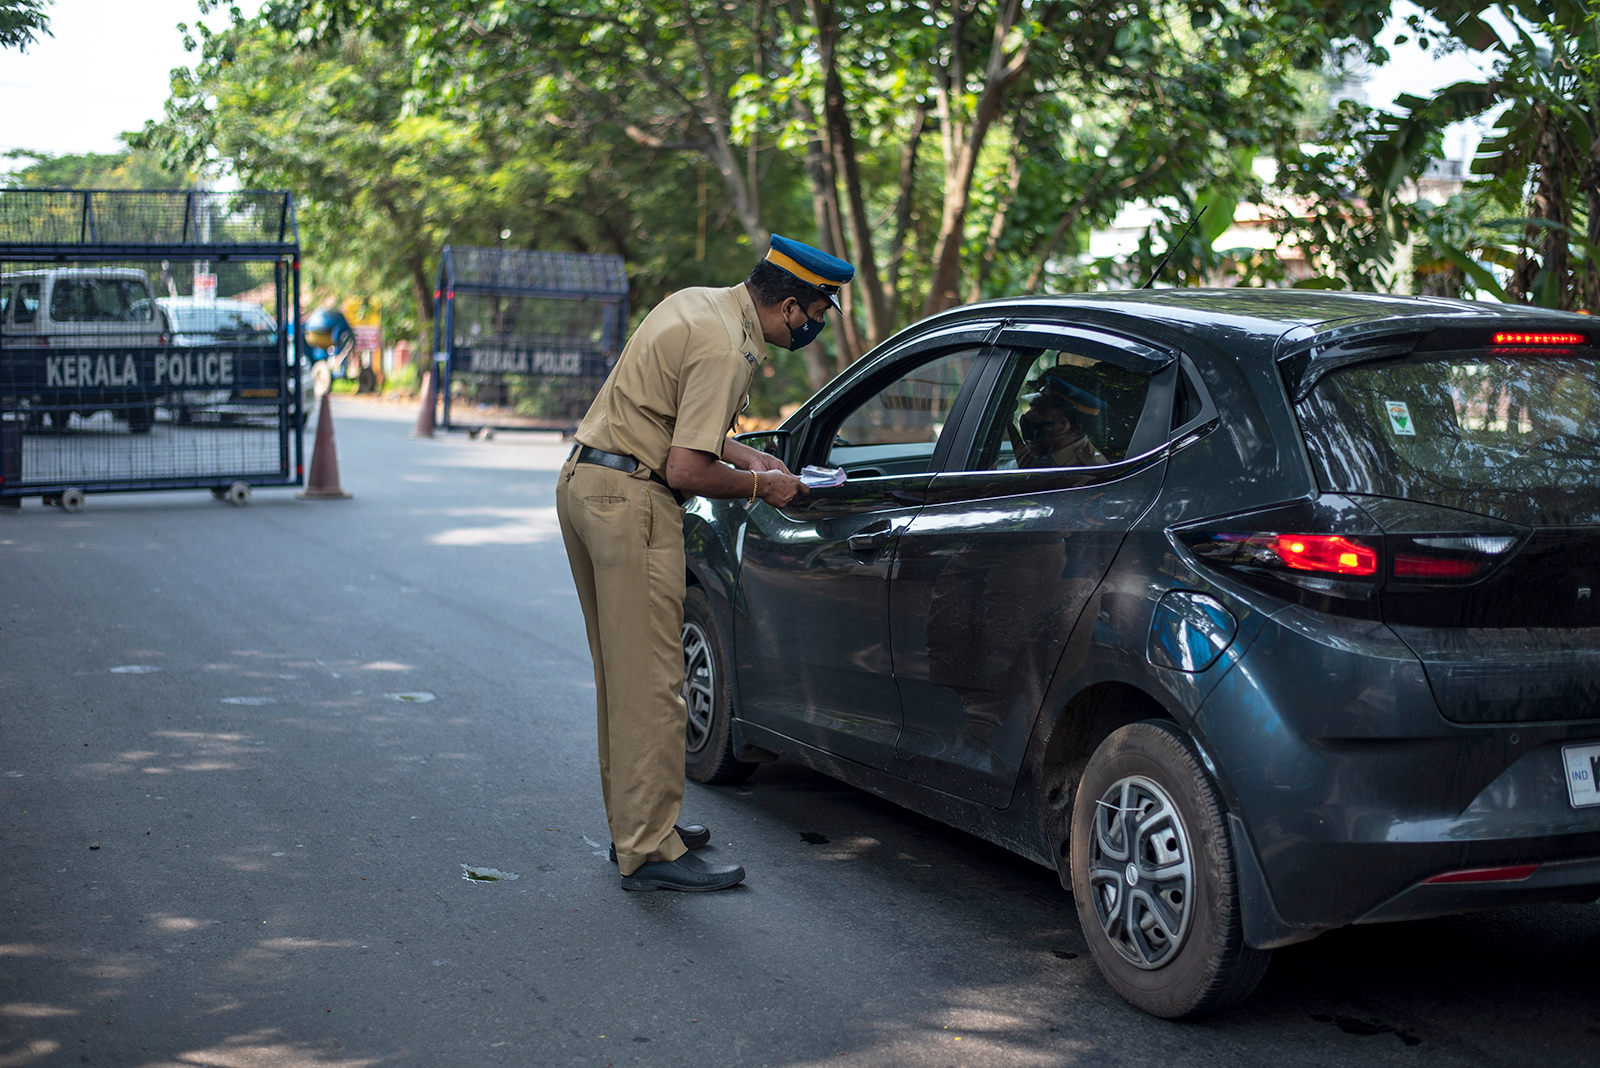 A policeman checks on commuters during weekend restrictions imposed to curb the spread of Covid-19 in Kochi, Kerala state, India, on April 25.